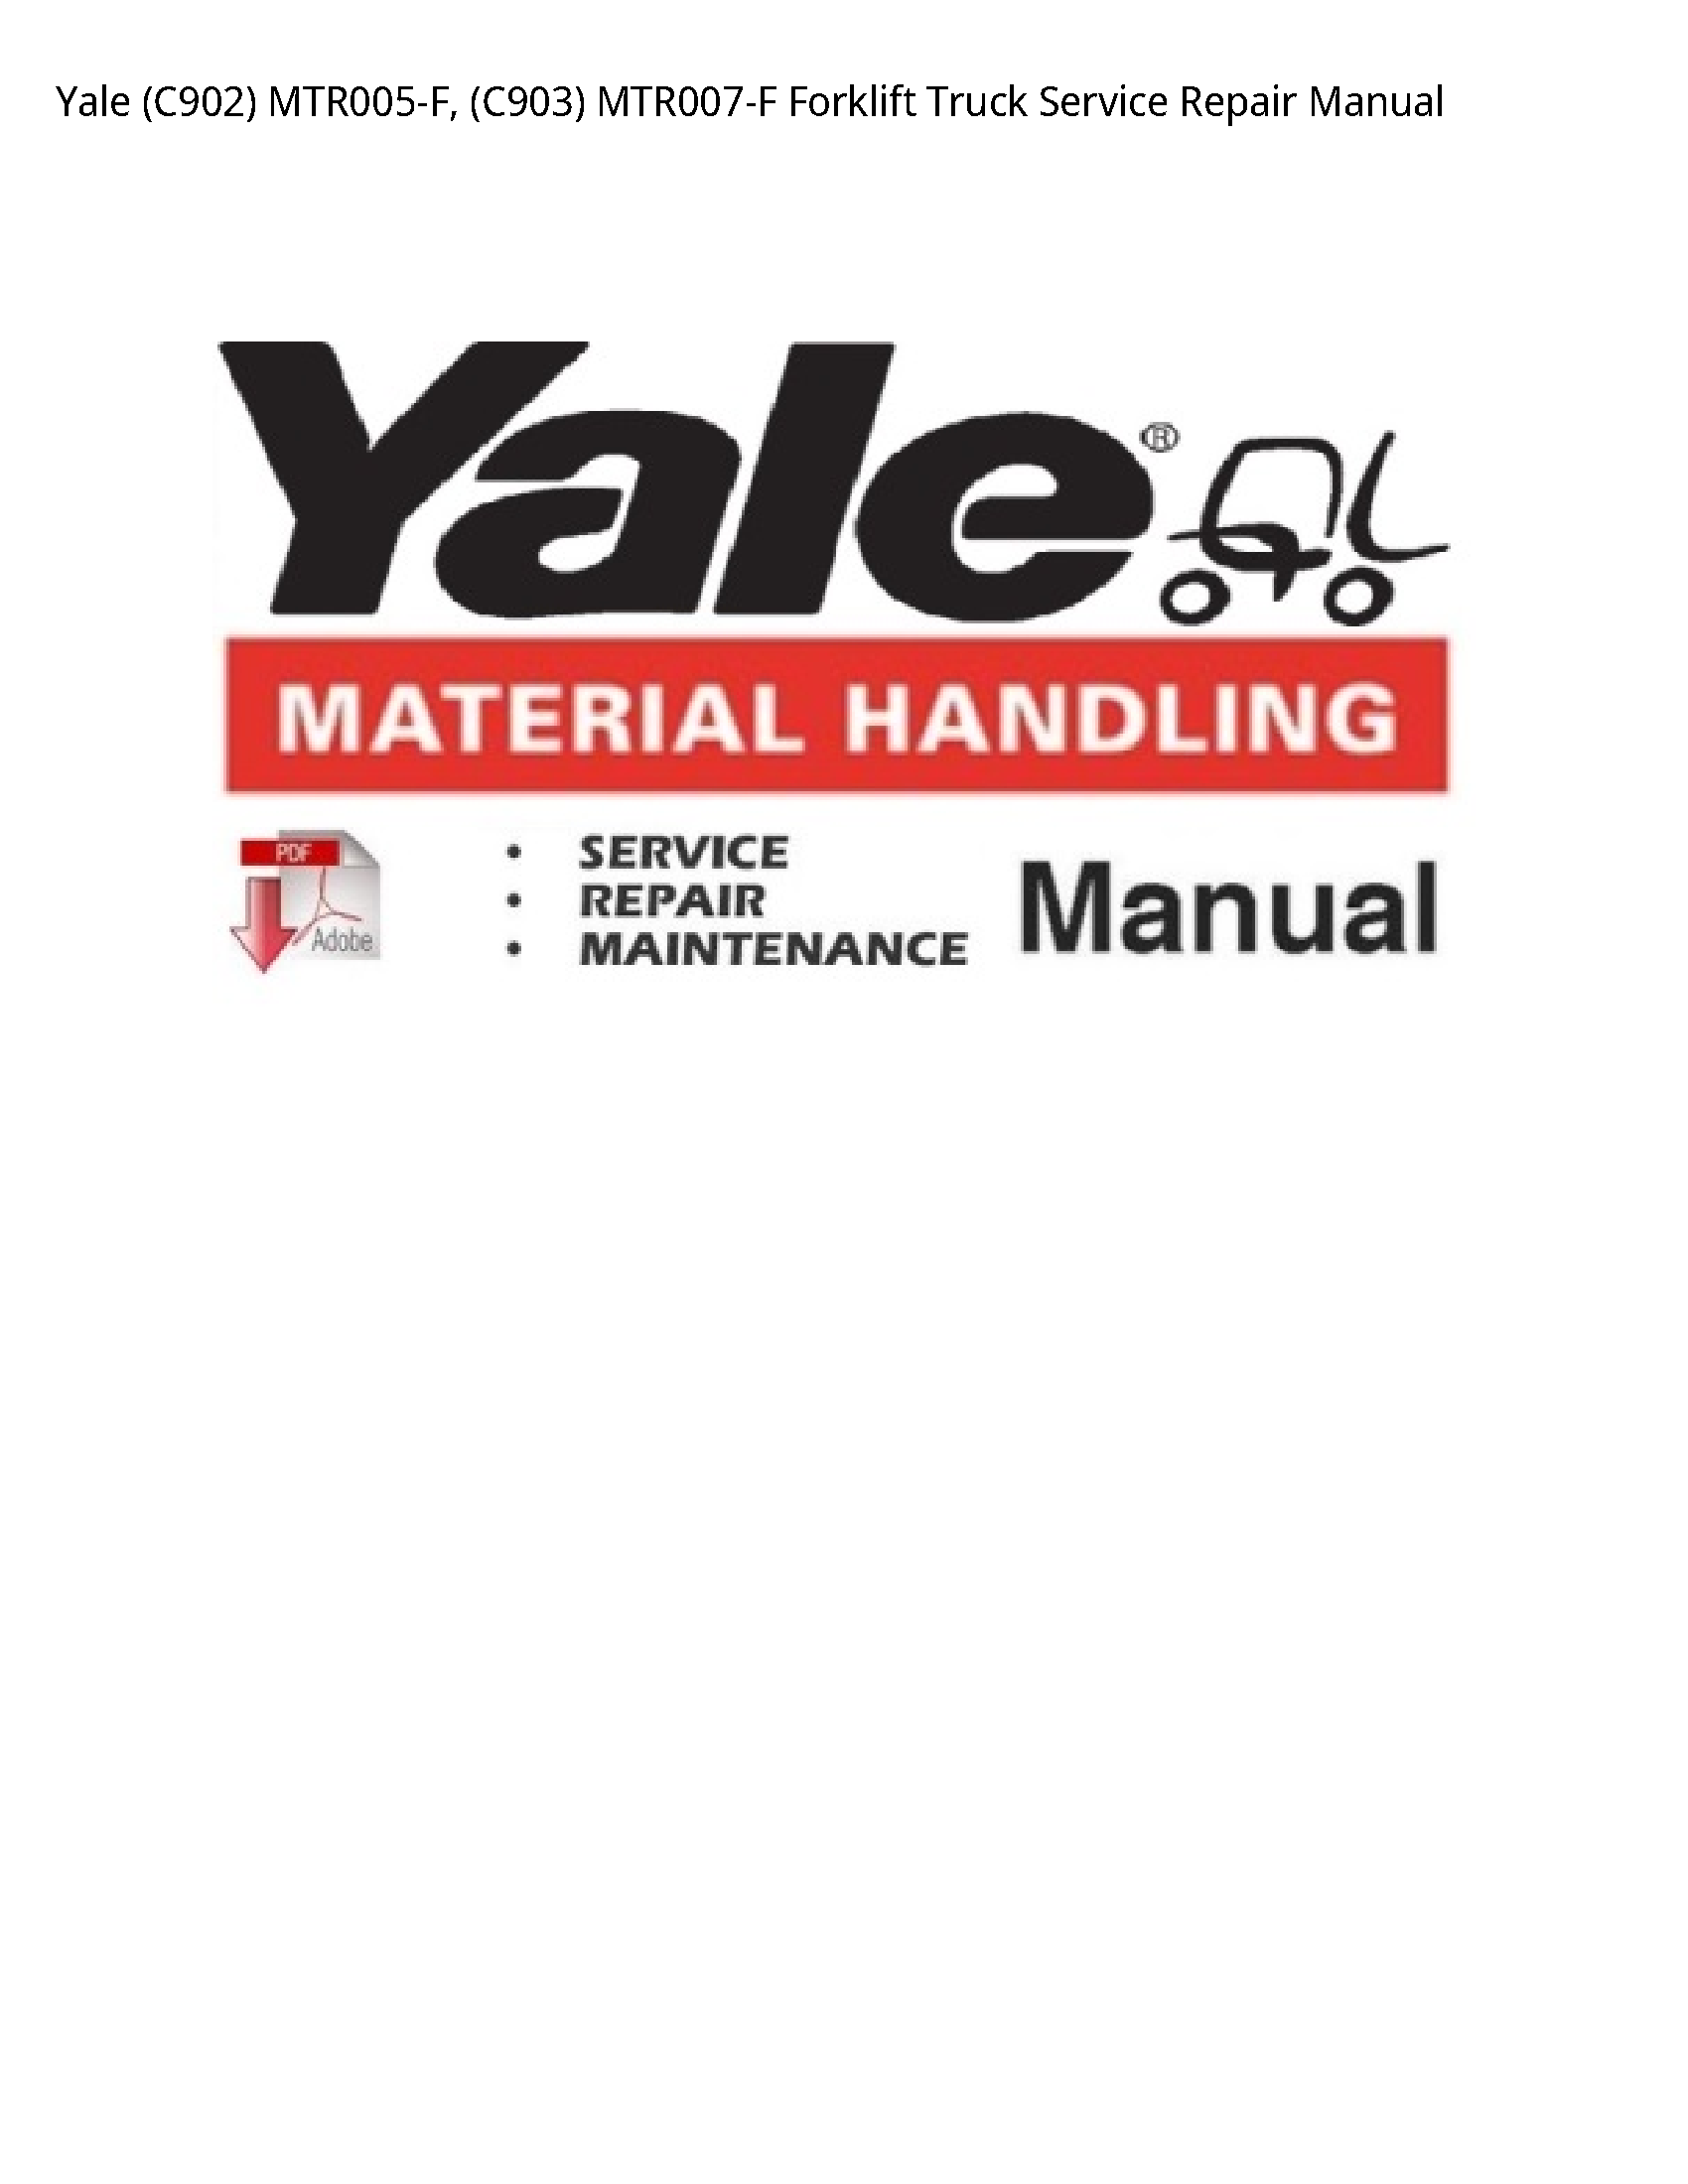 Yale (C902) Forklift Truck manual